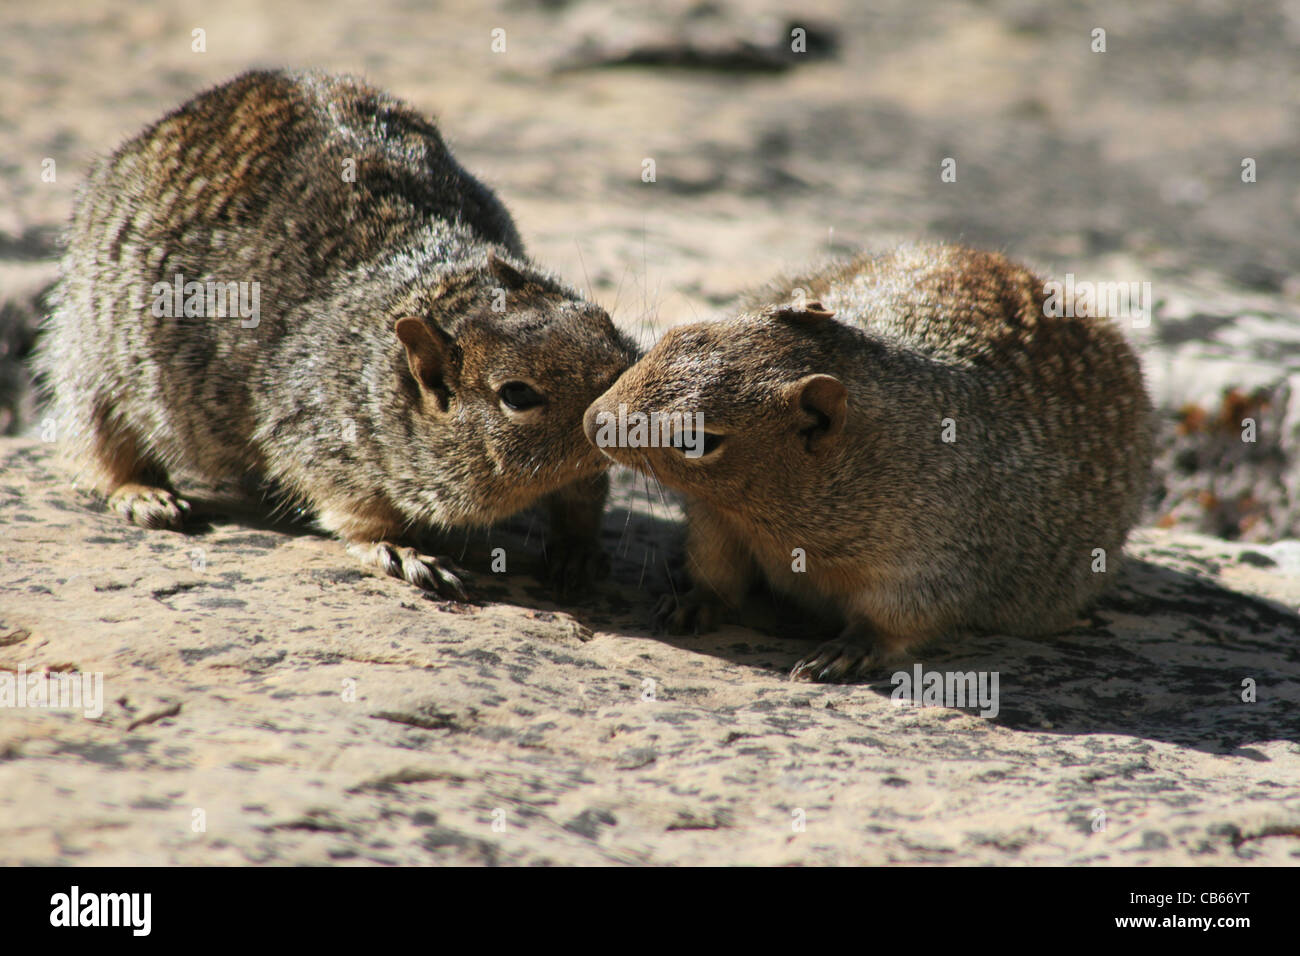 two rock squirrels ( Spermophilus variegatus ) kissing or grooming each other Stock Photo